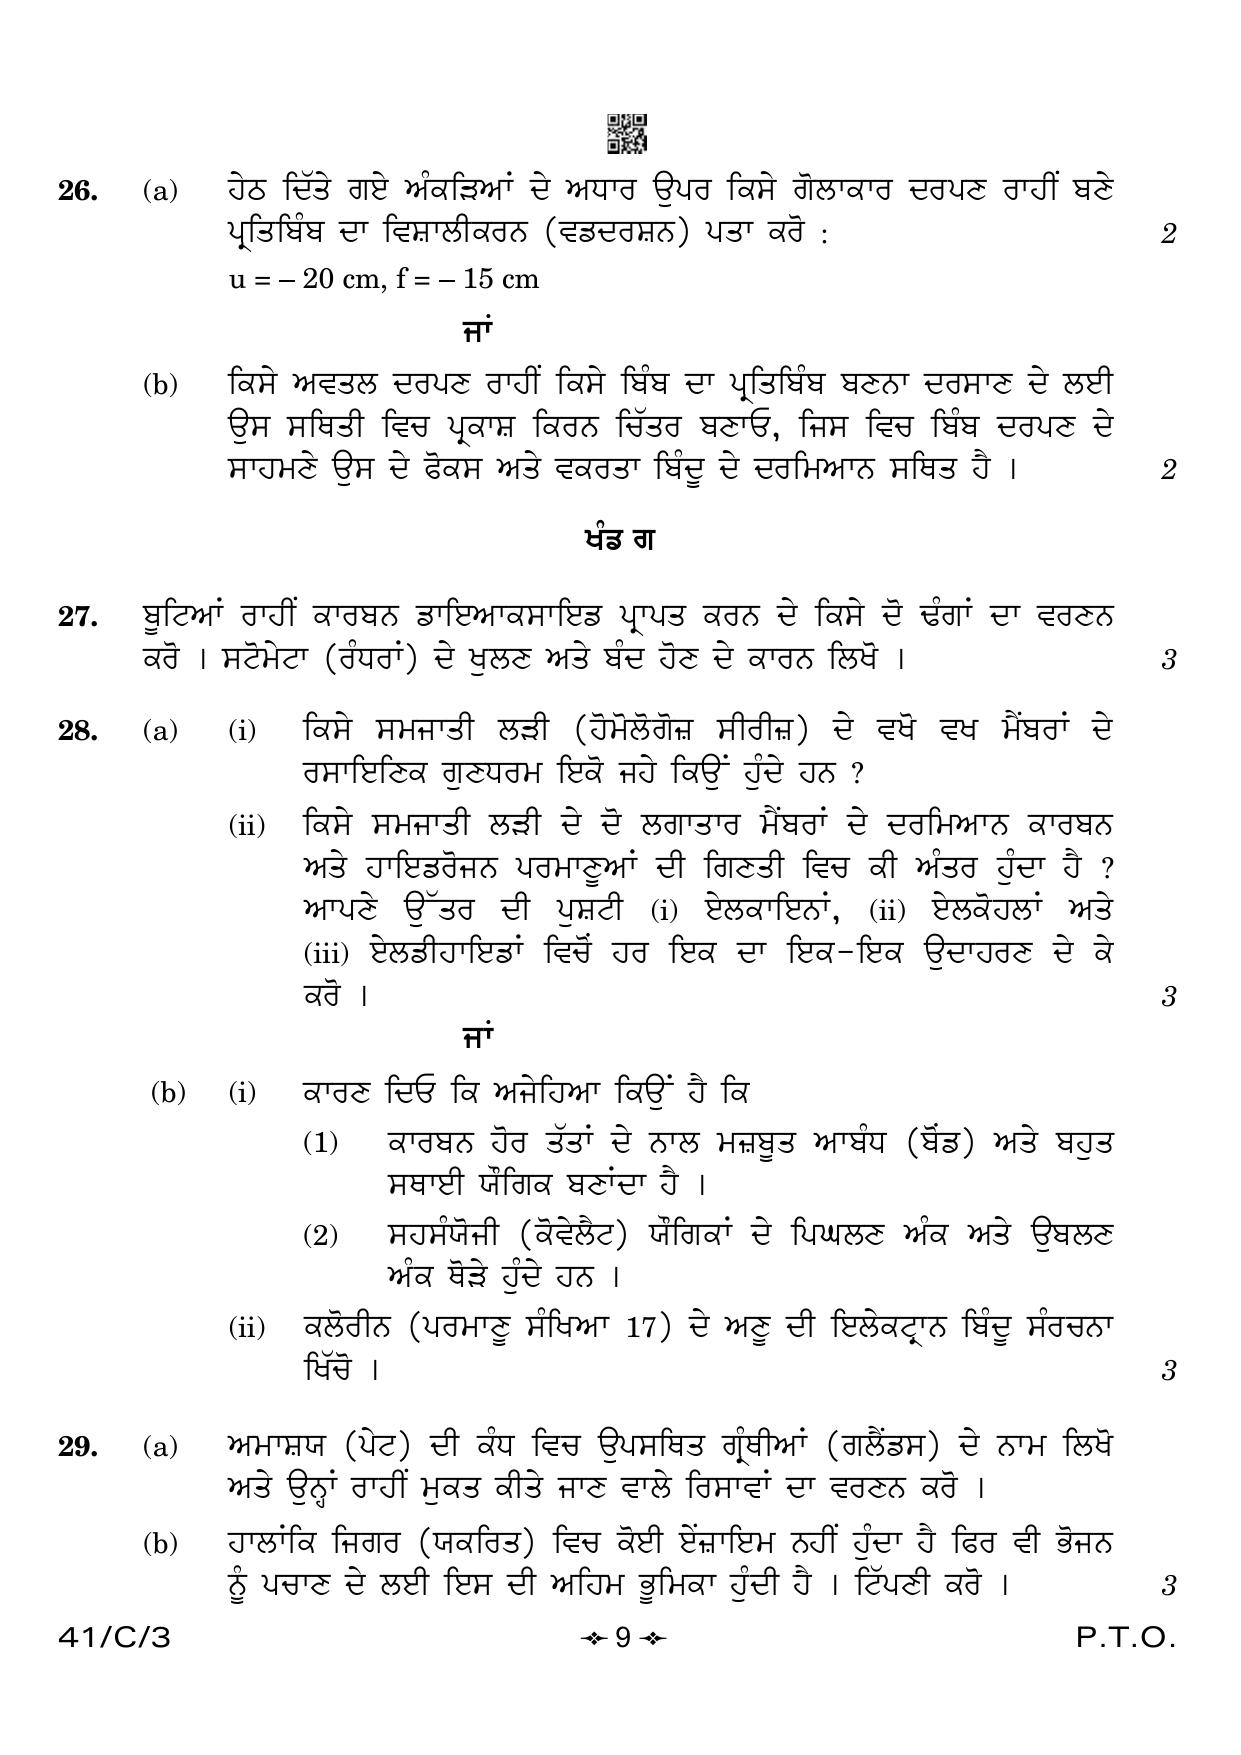 CBSE Class 10 41-3 Science Punjabi 2023 (Compartment) Question Paper - Page 9